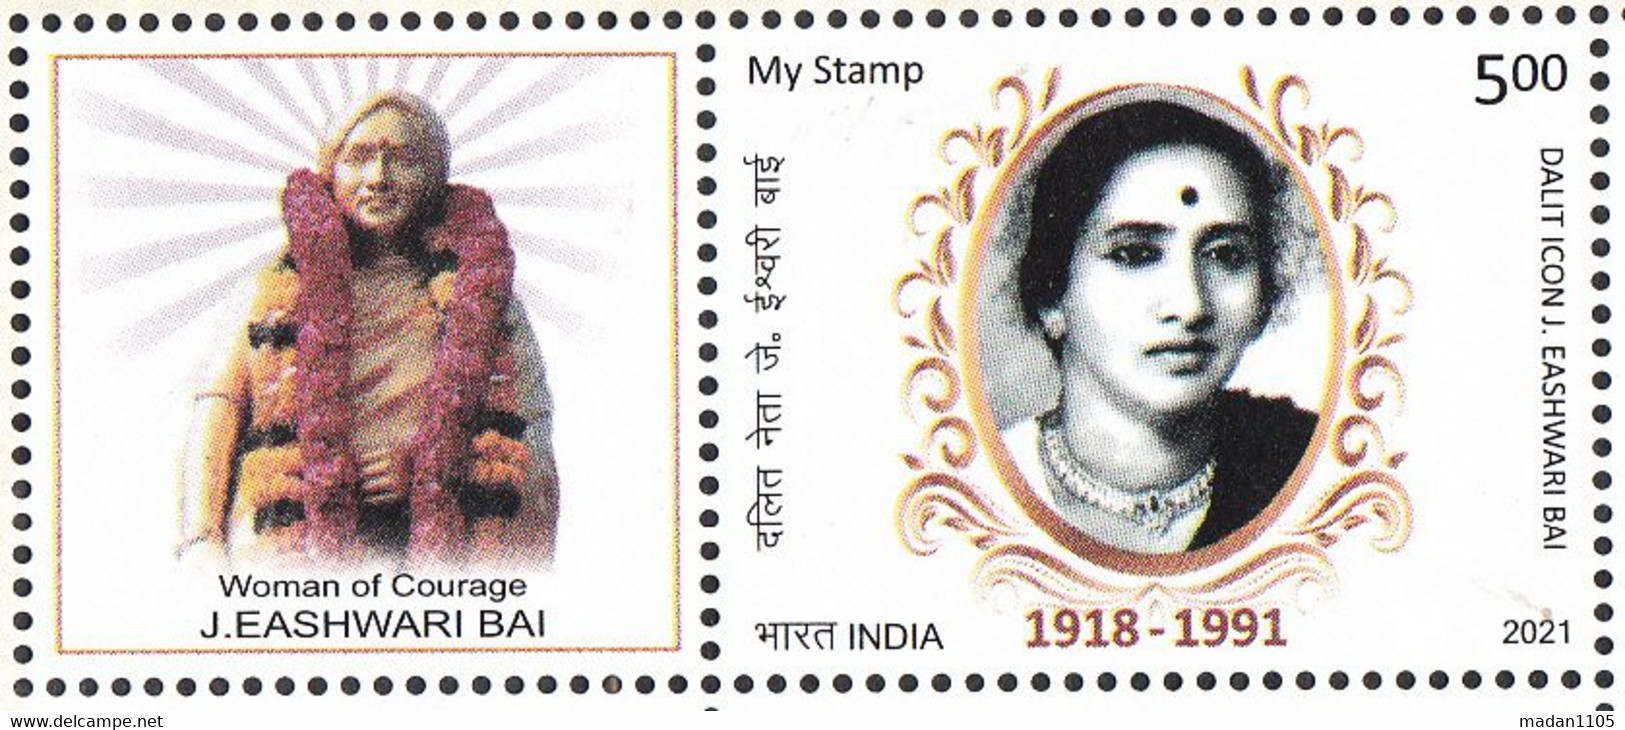 INDIA 2021 MY STAMP , Celebrity  LATE (1918-1991)  J EASHWARI BAI, (Dalit Icon), Woman Of Courage,LIMITED ISSUE  MNH(**) - Unused Stamps